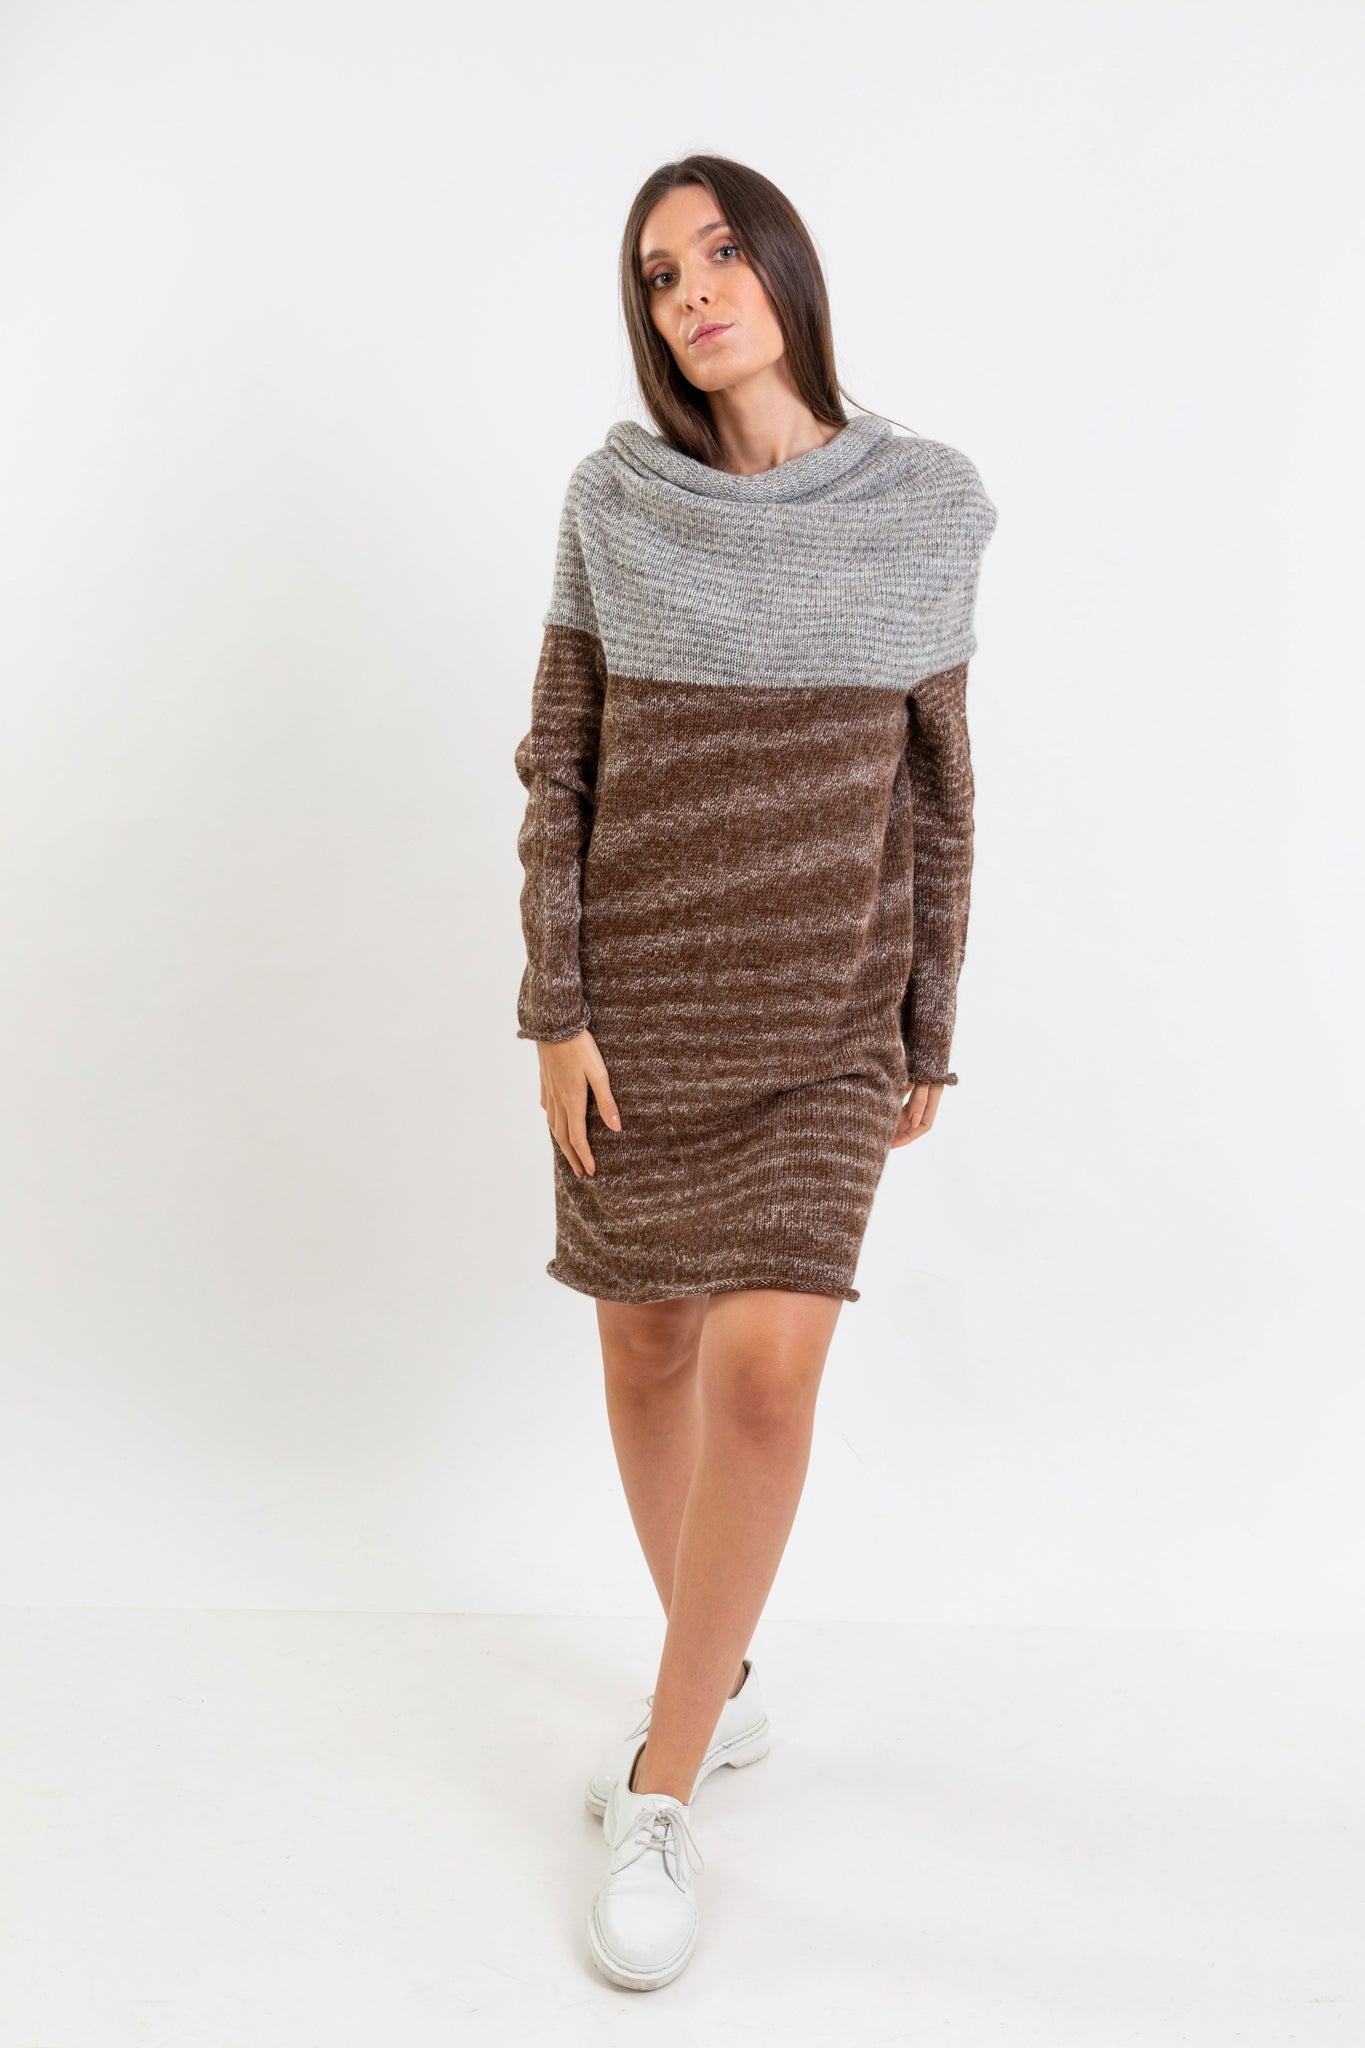 Multifunctional alpaca wool dress in Mixbrown & Mixgrey, which also can be a top or hoody.